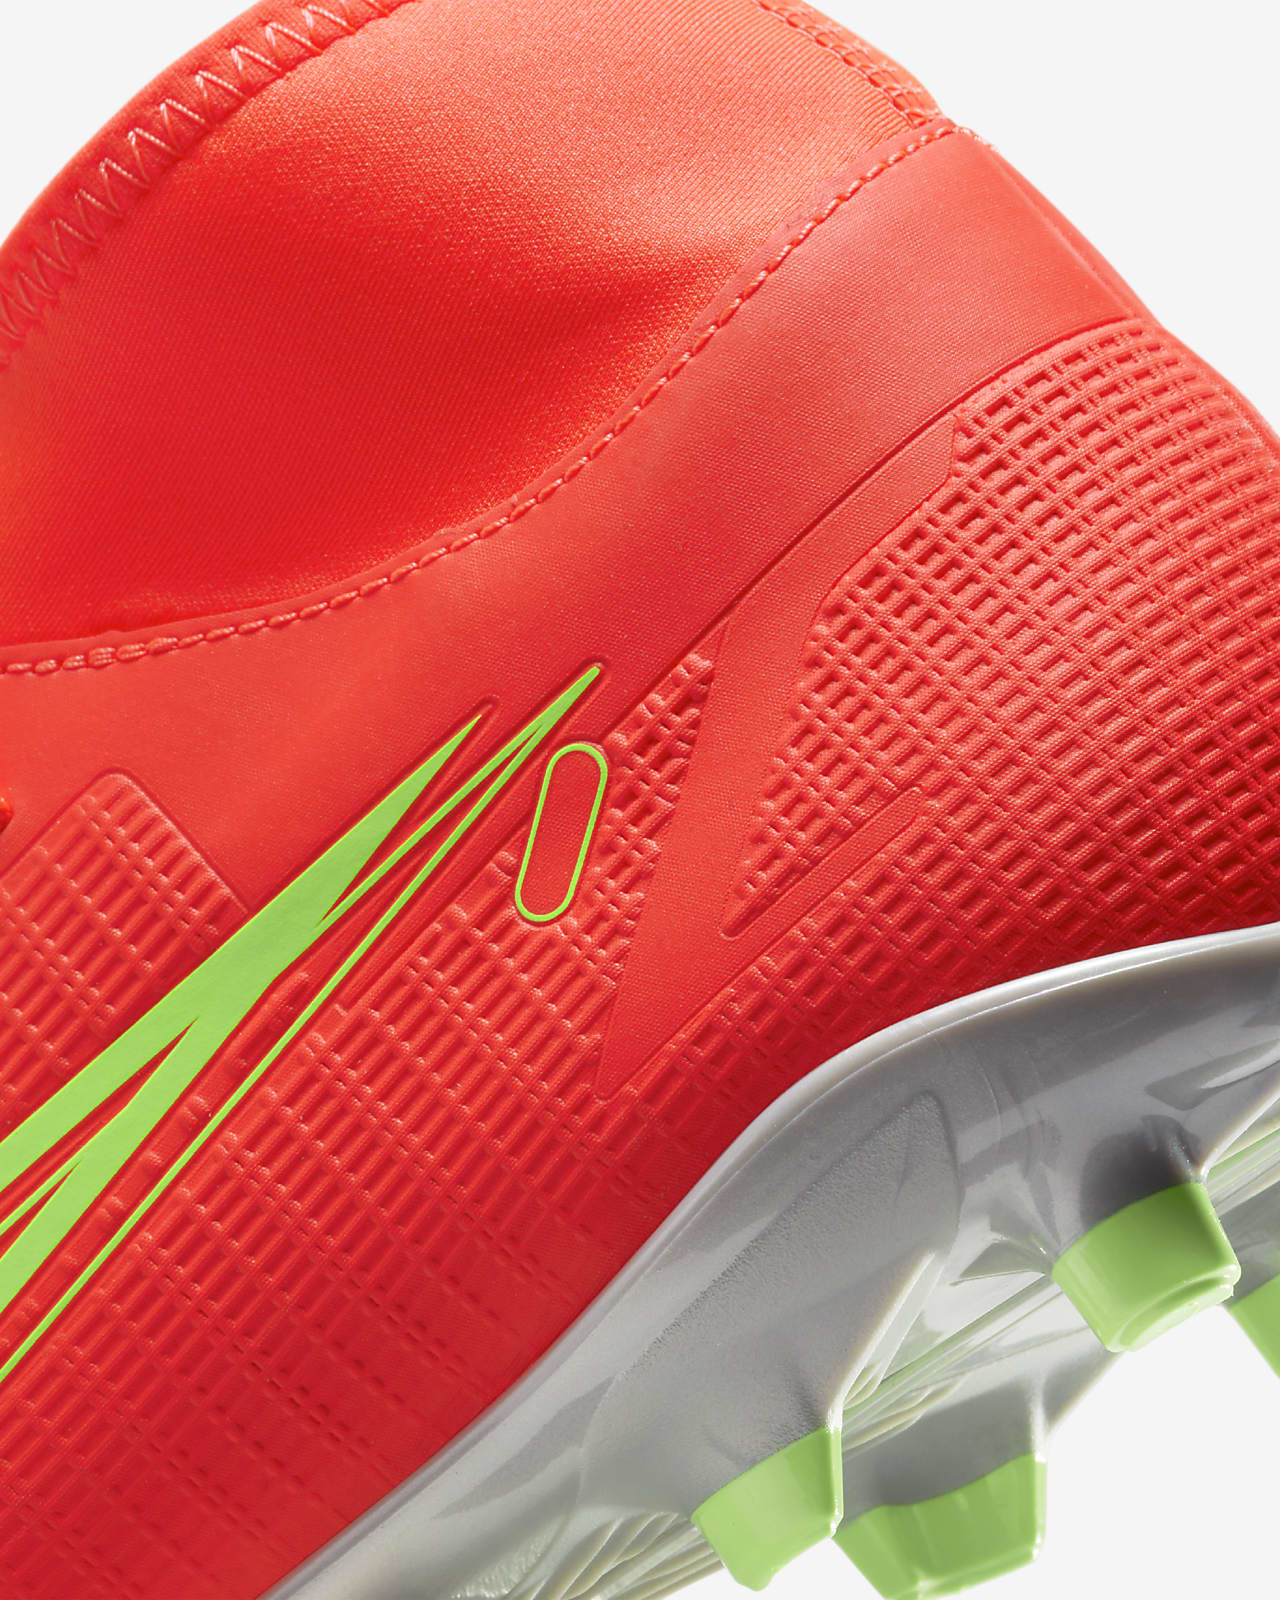 nike mercurial red boots